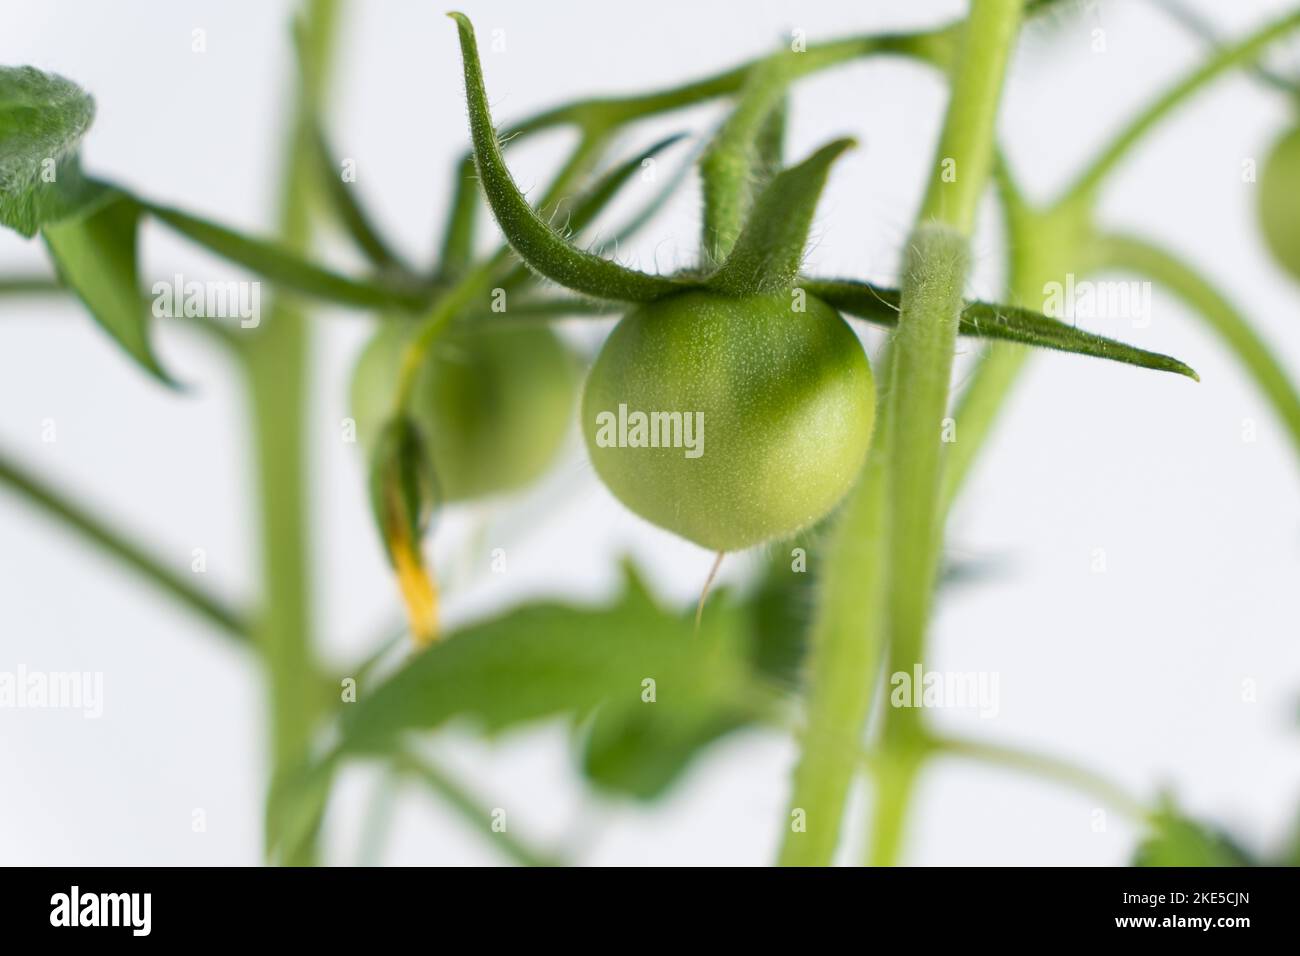 A green unripe tomato on a branch on a white background. Growing tomatoes. Stock Photo